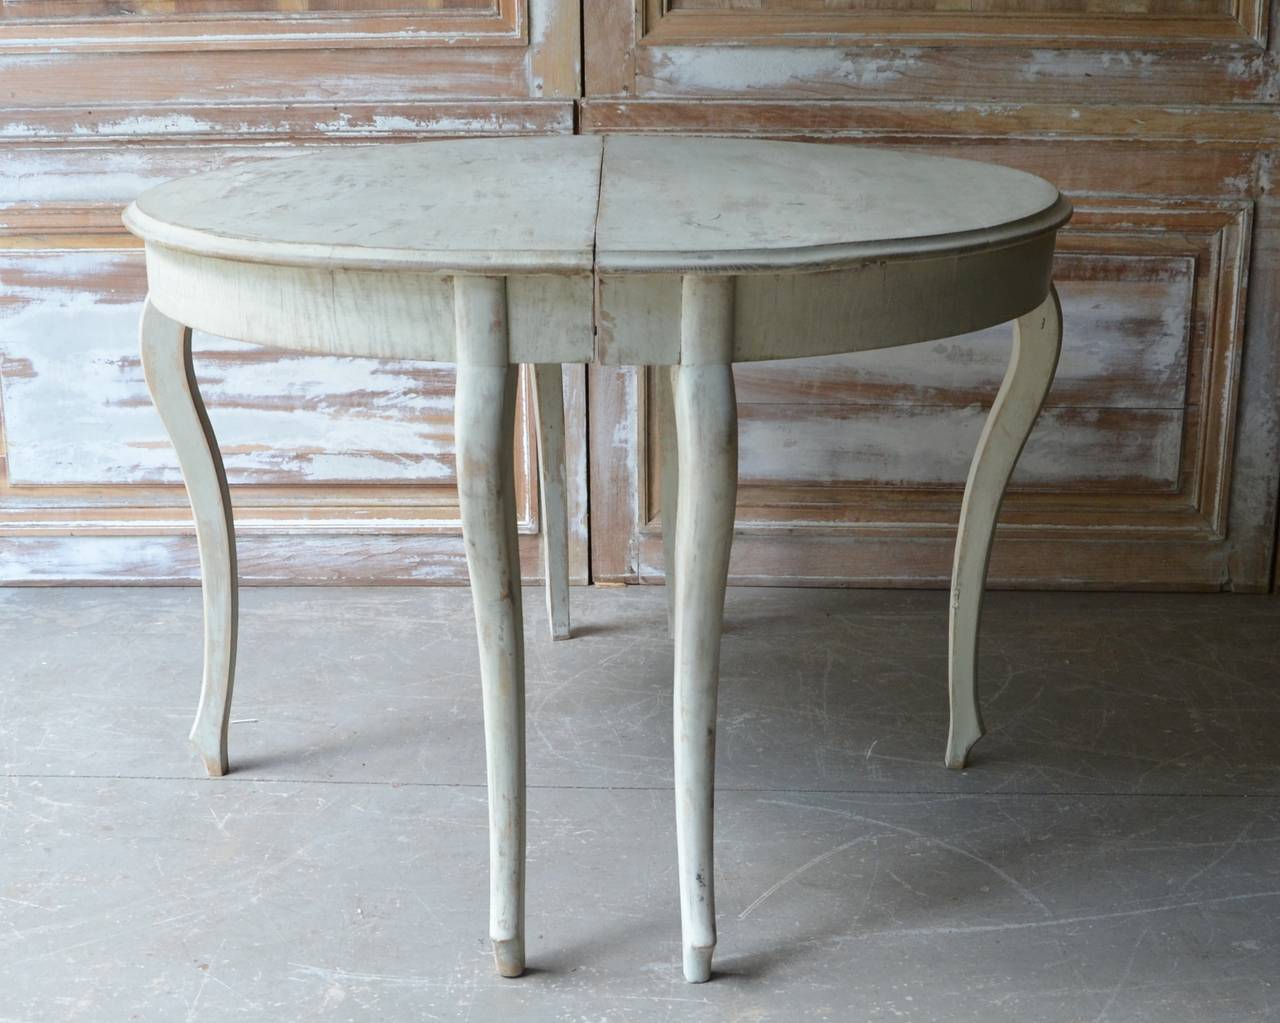 Painted Pair of 19th Century Swedish Demilune Tables